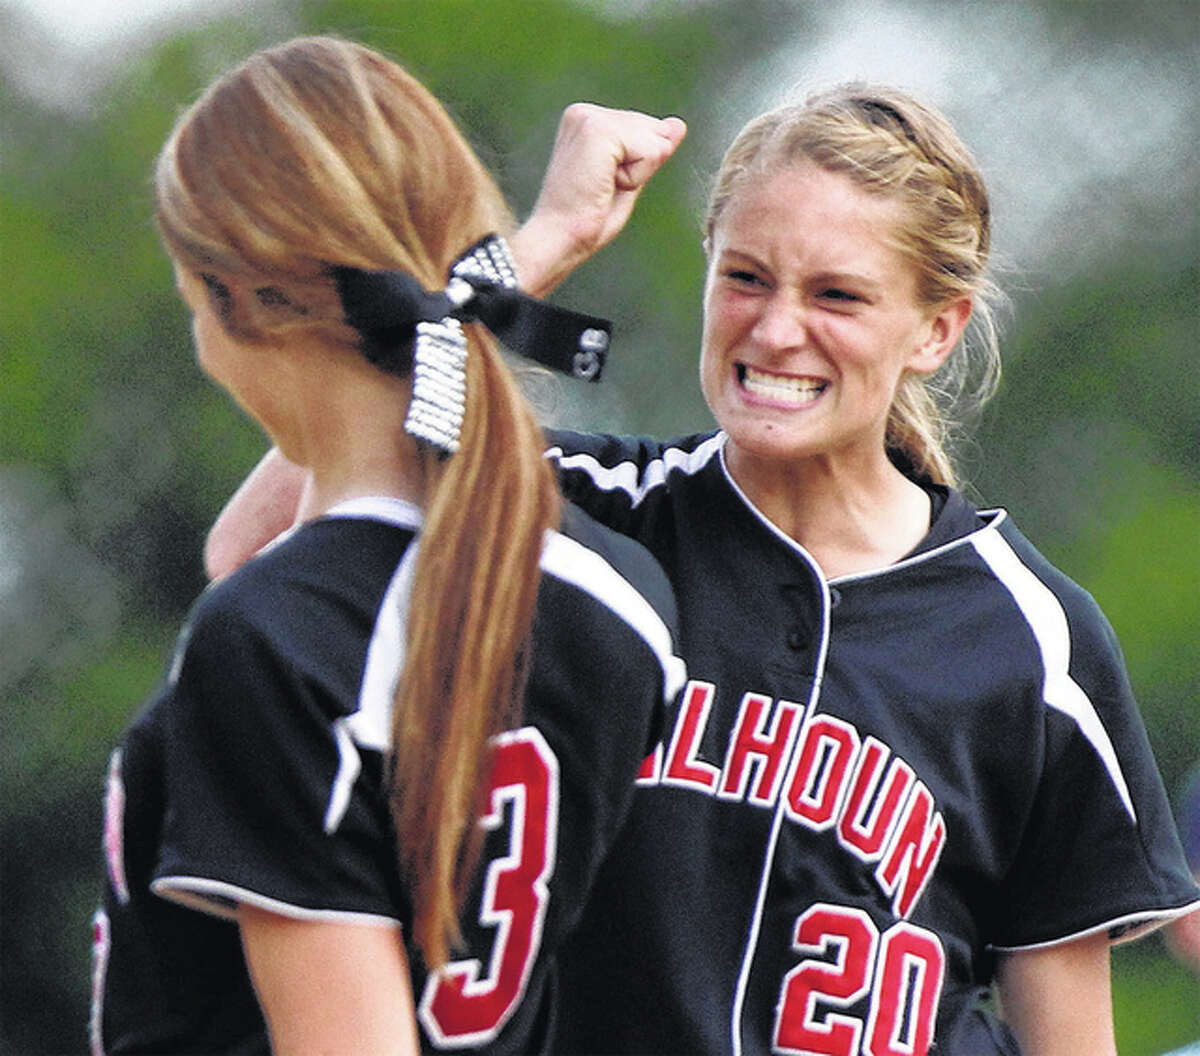 Calhoun third baseman Emma Baalman (right) congratulates pitcher Grace Baalman after a Warriors win in the 2015 Class 1A state tournament in East Peoria. Both return from a 34-4 state championship team ranked No. 1 in the state and seeking back-to-back titles.